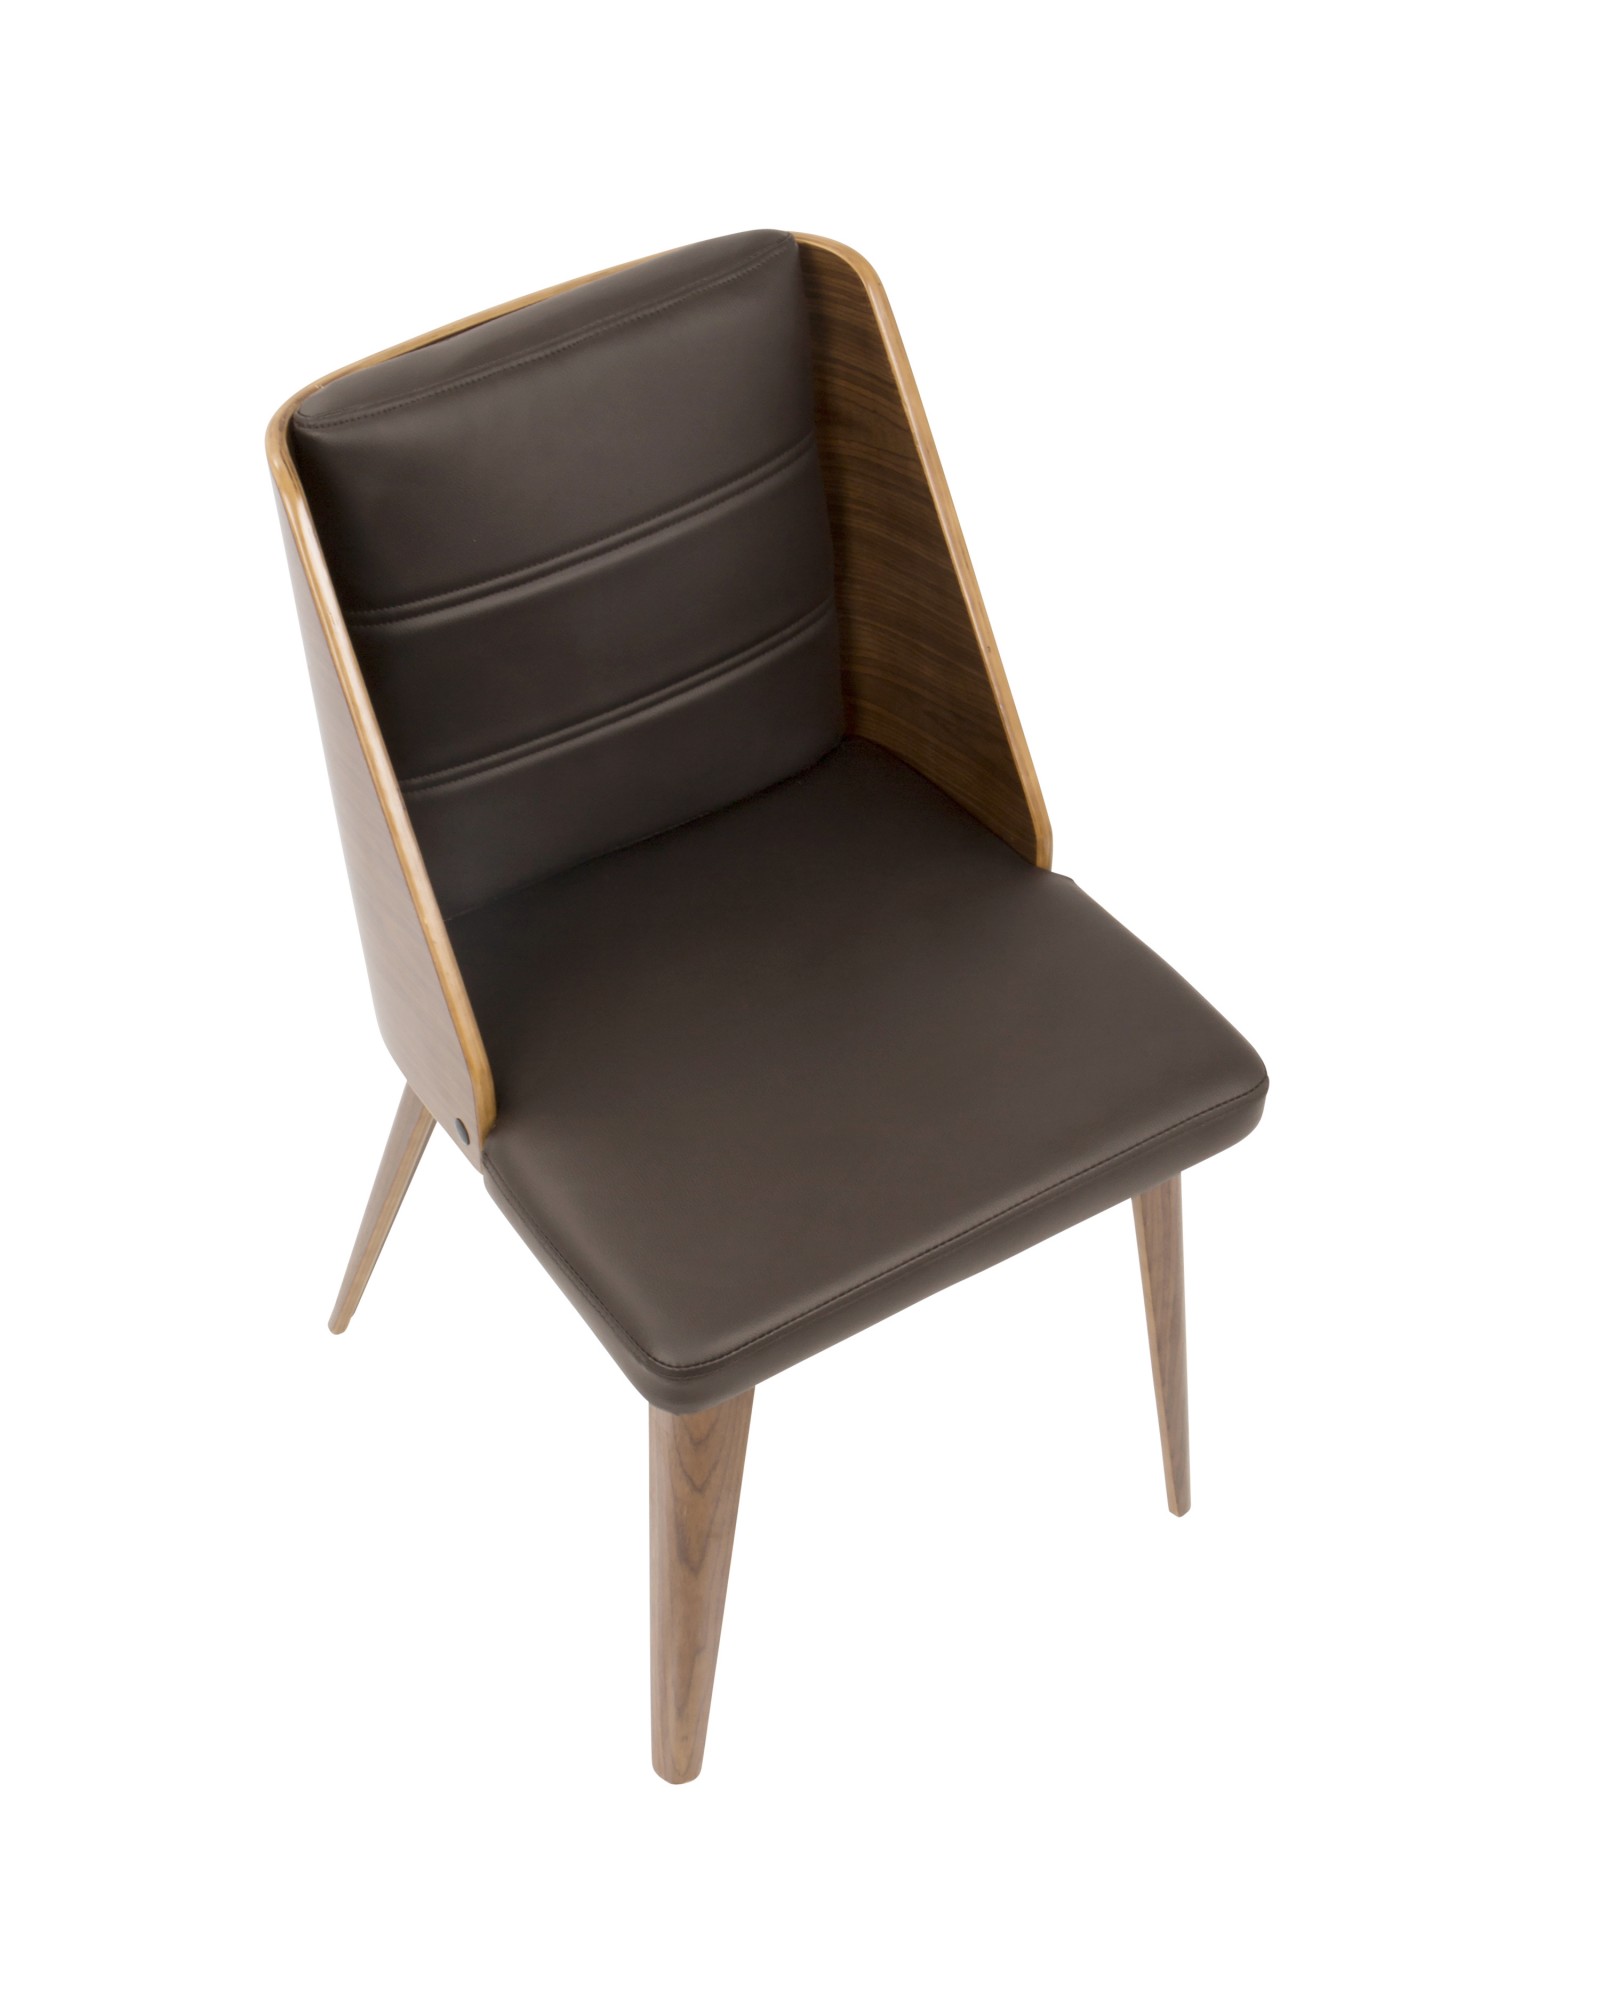 Galanti Mid-Century Modern Dining/Accent Chair in Walnut Wood and Brown Faux Leather - Set of 2